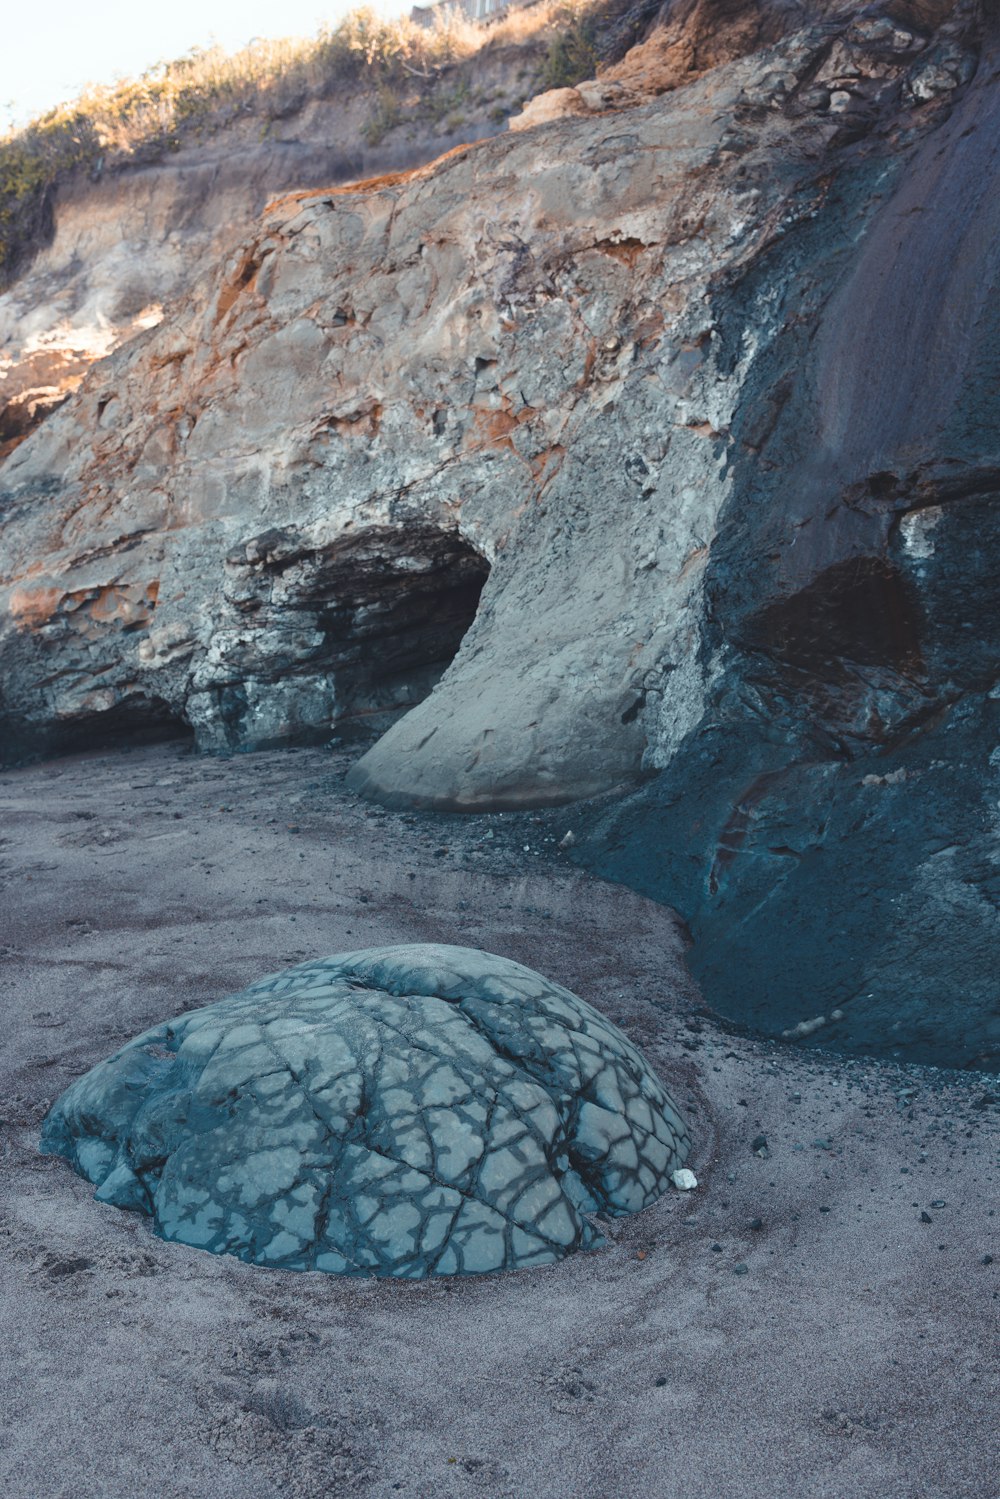 a rock formation with a blue substance in the middle of it